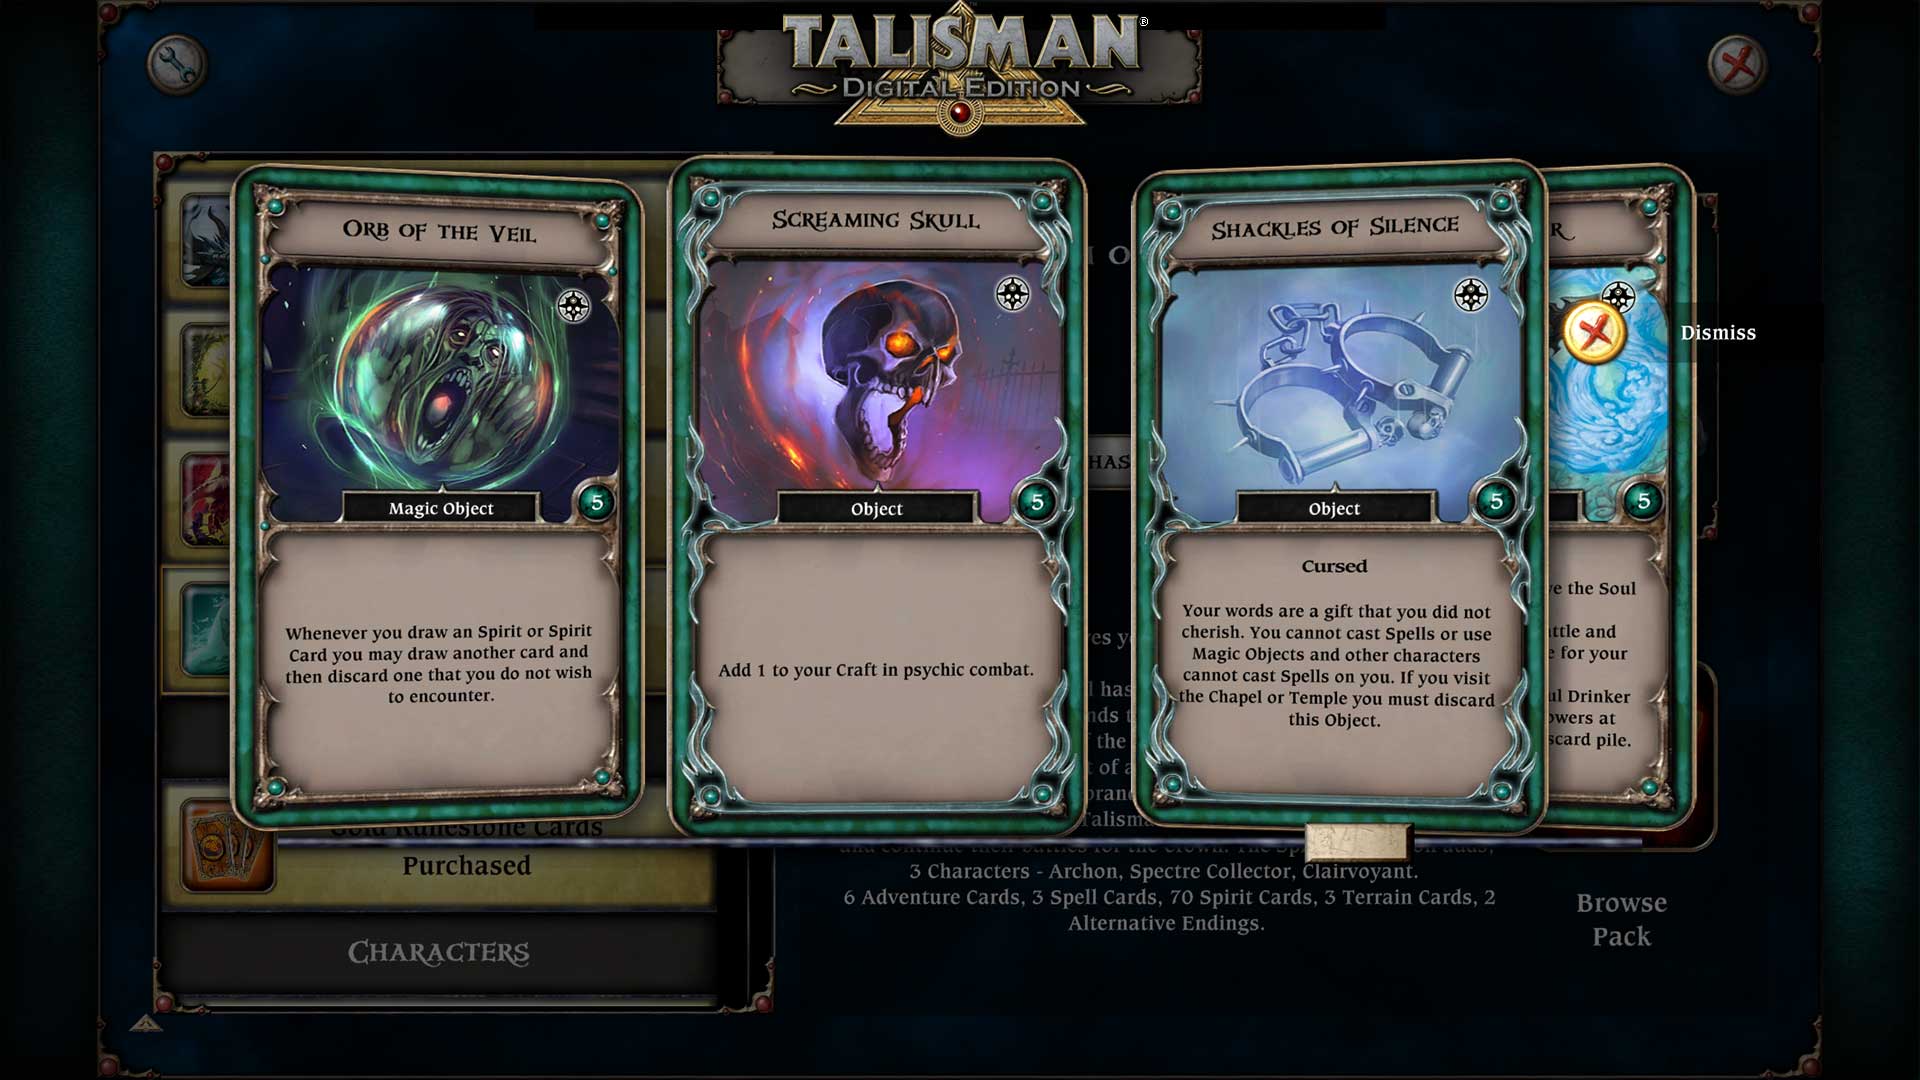 Talisman - The Realm of Souls Expansion DLC Steam CD Key 2.16 USD